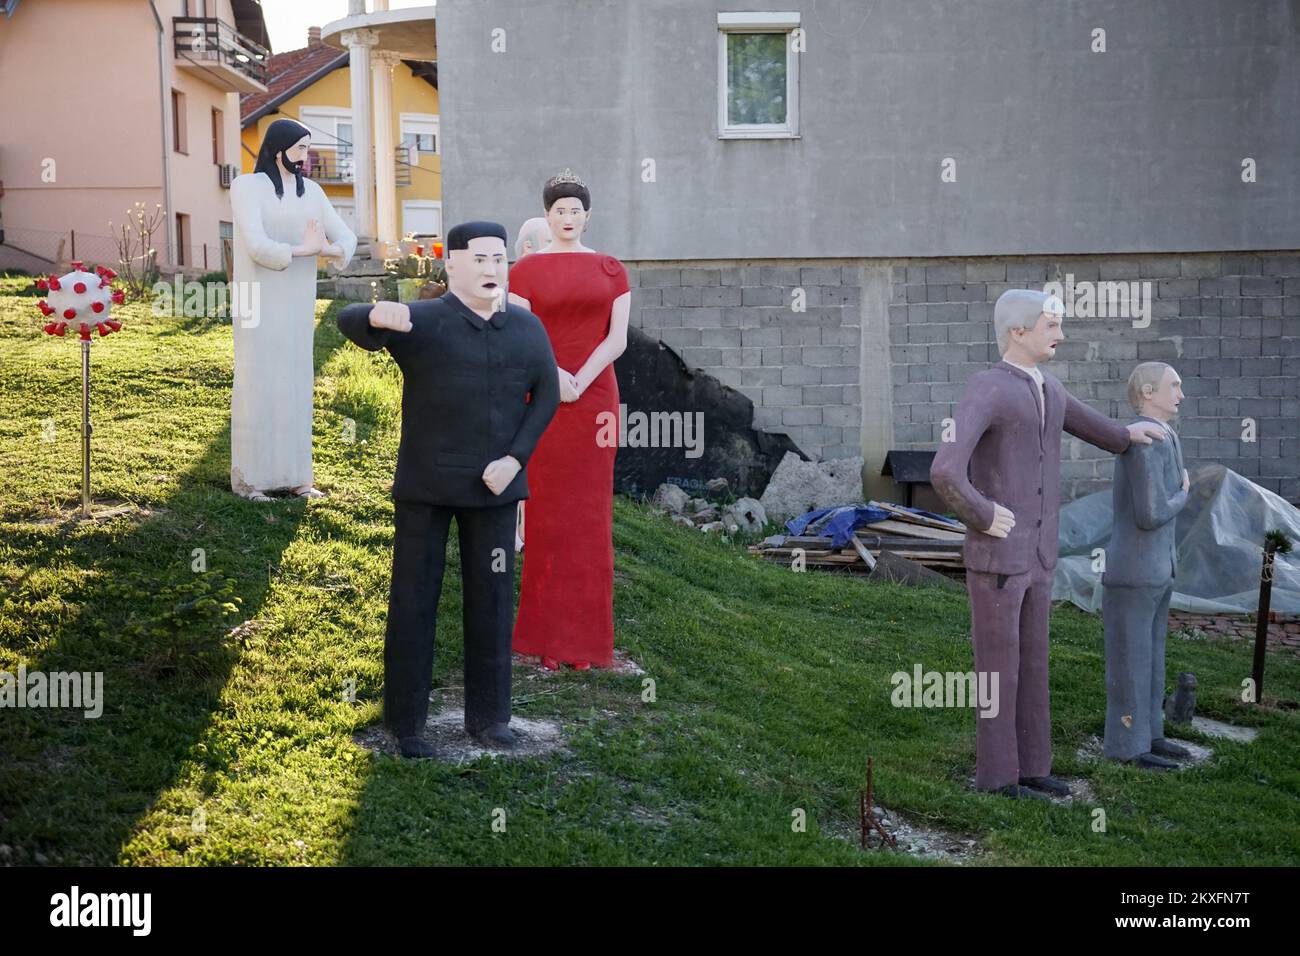 04.05.2020., Paprikovac, Banja Luka ,Bosnia and Herzegovina - Bosnian sculptor and writer Stevo Selak from Banja Luka made a monument of coronavirus. This artist is known for his statues of Donald Trump, Vladimir Putin, Jesus Christ, Kim Jong-un, Socrates and Swedish Princess Victoria located in the courtyard of his house. His first statue was in honor of Vladimir Putin. The monument to the virus, which was placed in Selak's yard is attraction for passers-by and neighbors. Photo: Dejan Rakita/PIXSELL  Stock Photo